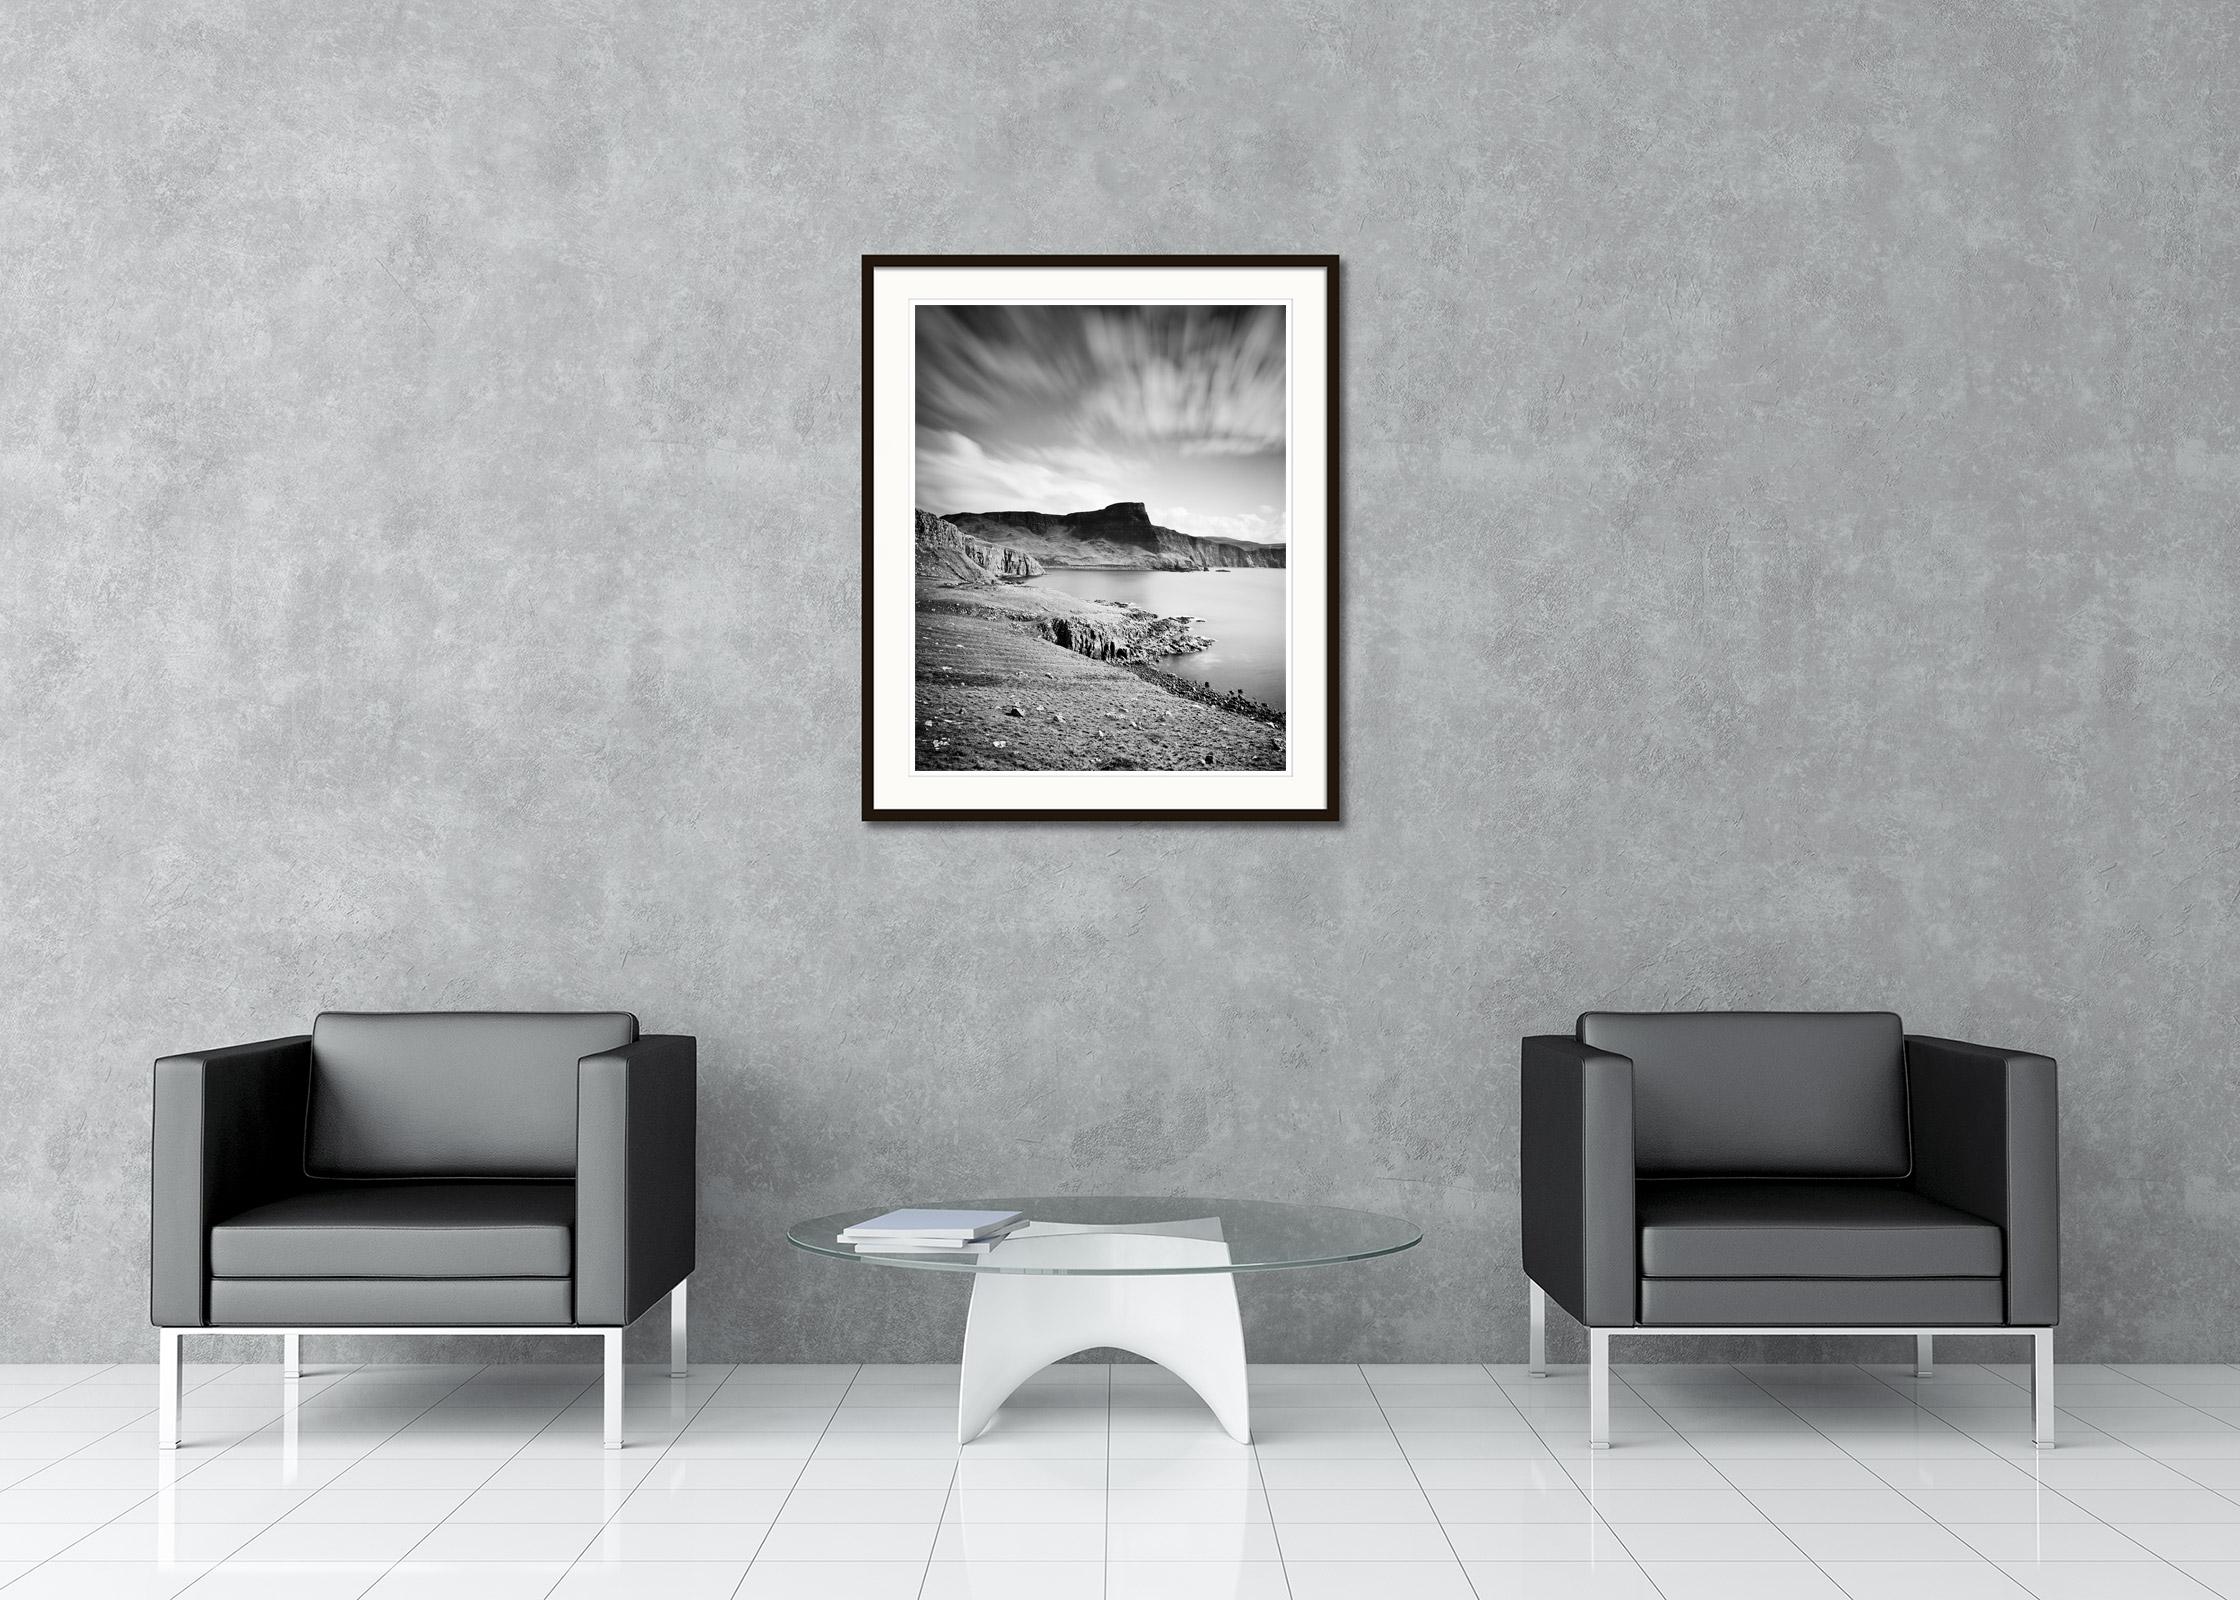 Gerald Berghammer - Limited edition of 7.
Archival fine art pigment print. Signed, titled, dated and numbered by artist. Certificate of authenticity included. Printed with 4cm white border.
15.75 x 19.69 in. (40 x 50 cm) edition of 8
23.63 x 29.53